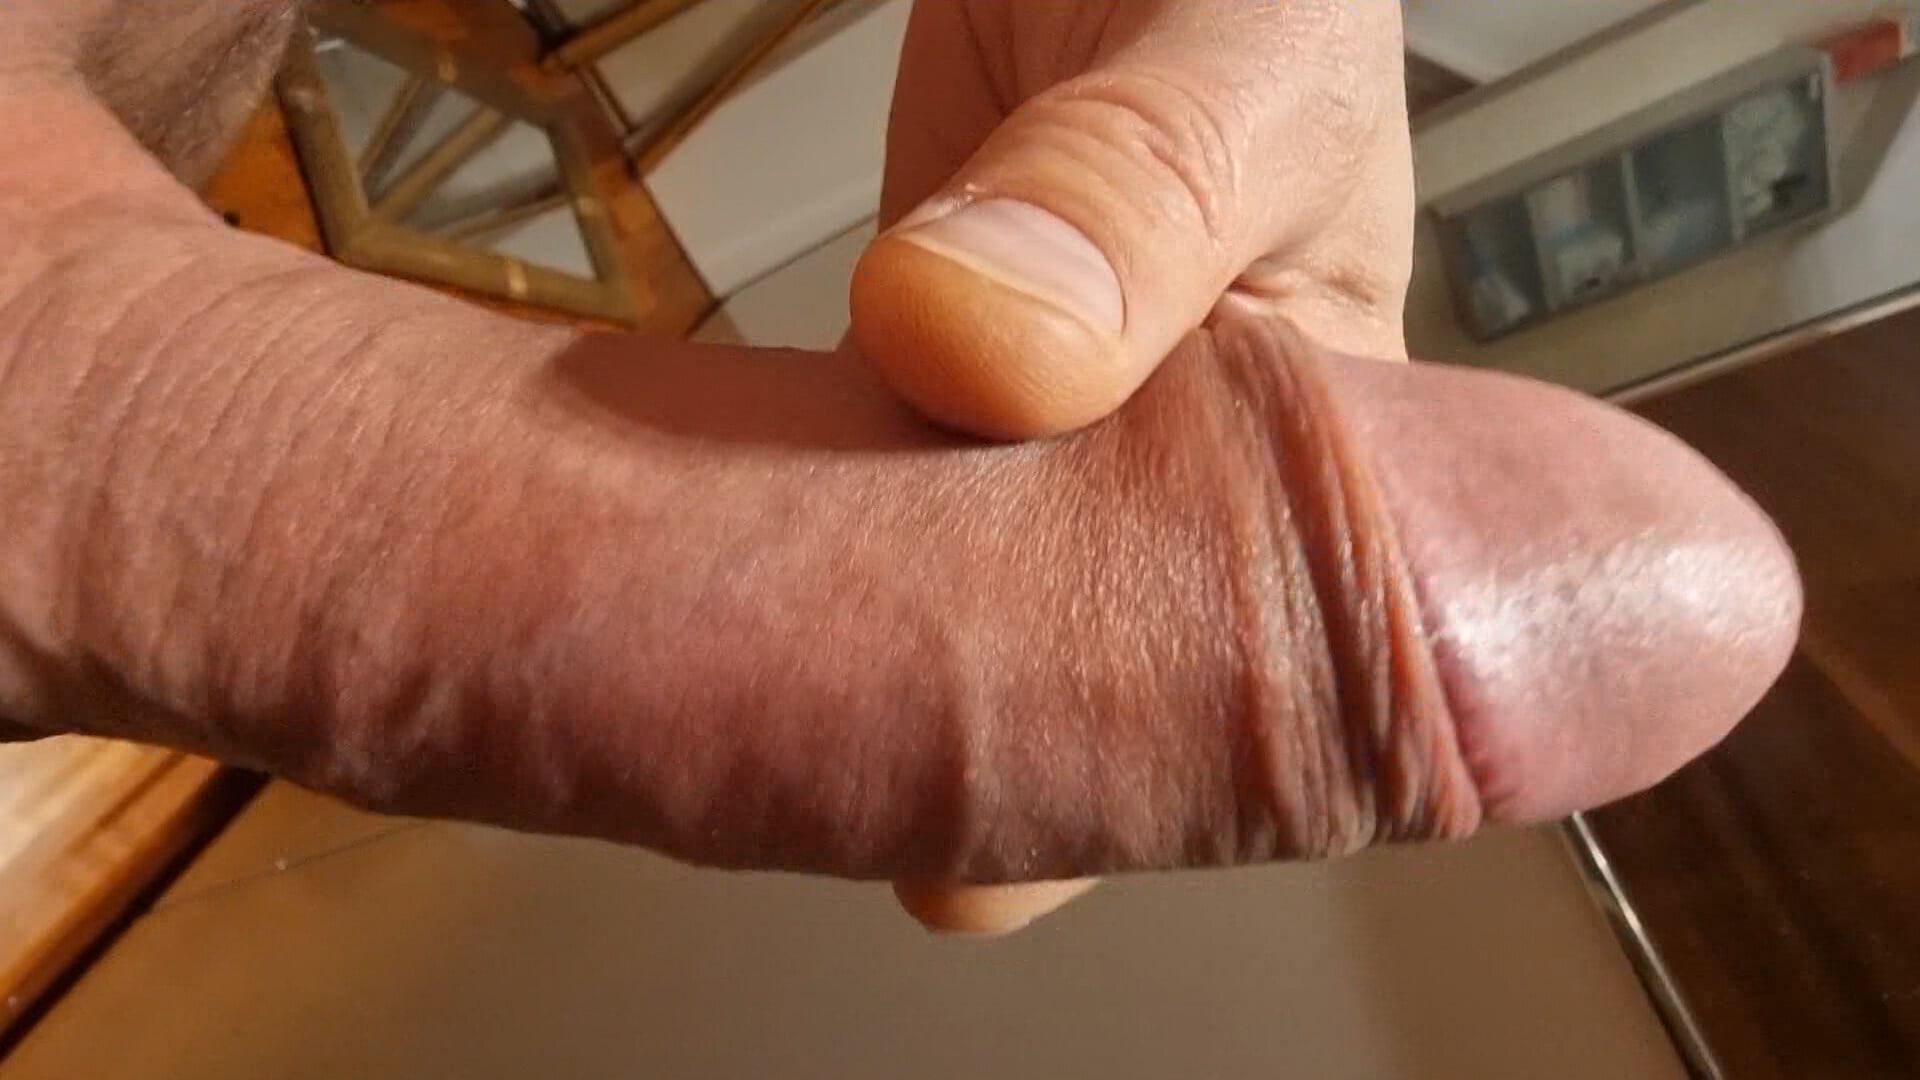 My fat cock shooting! #4